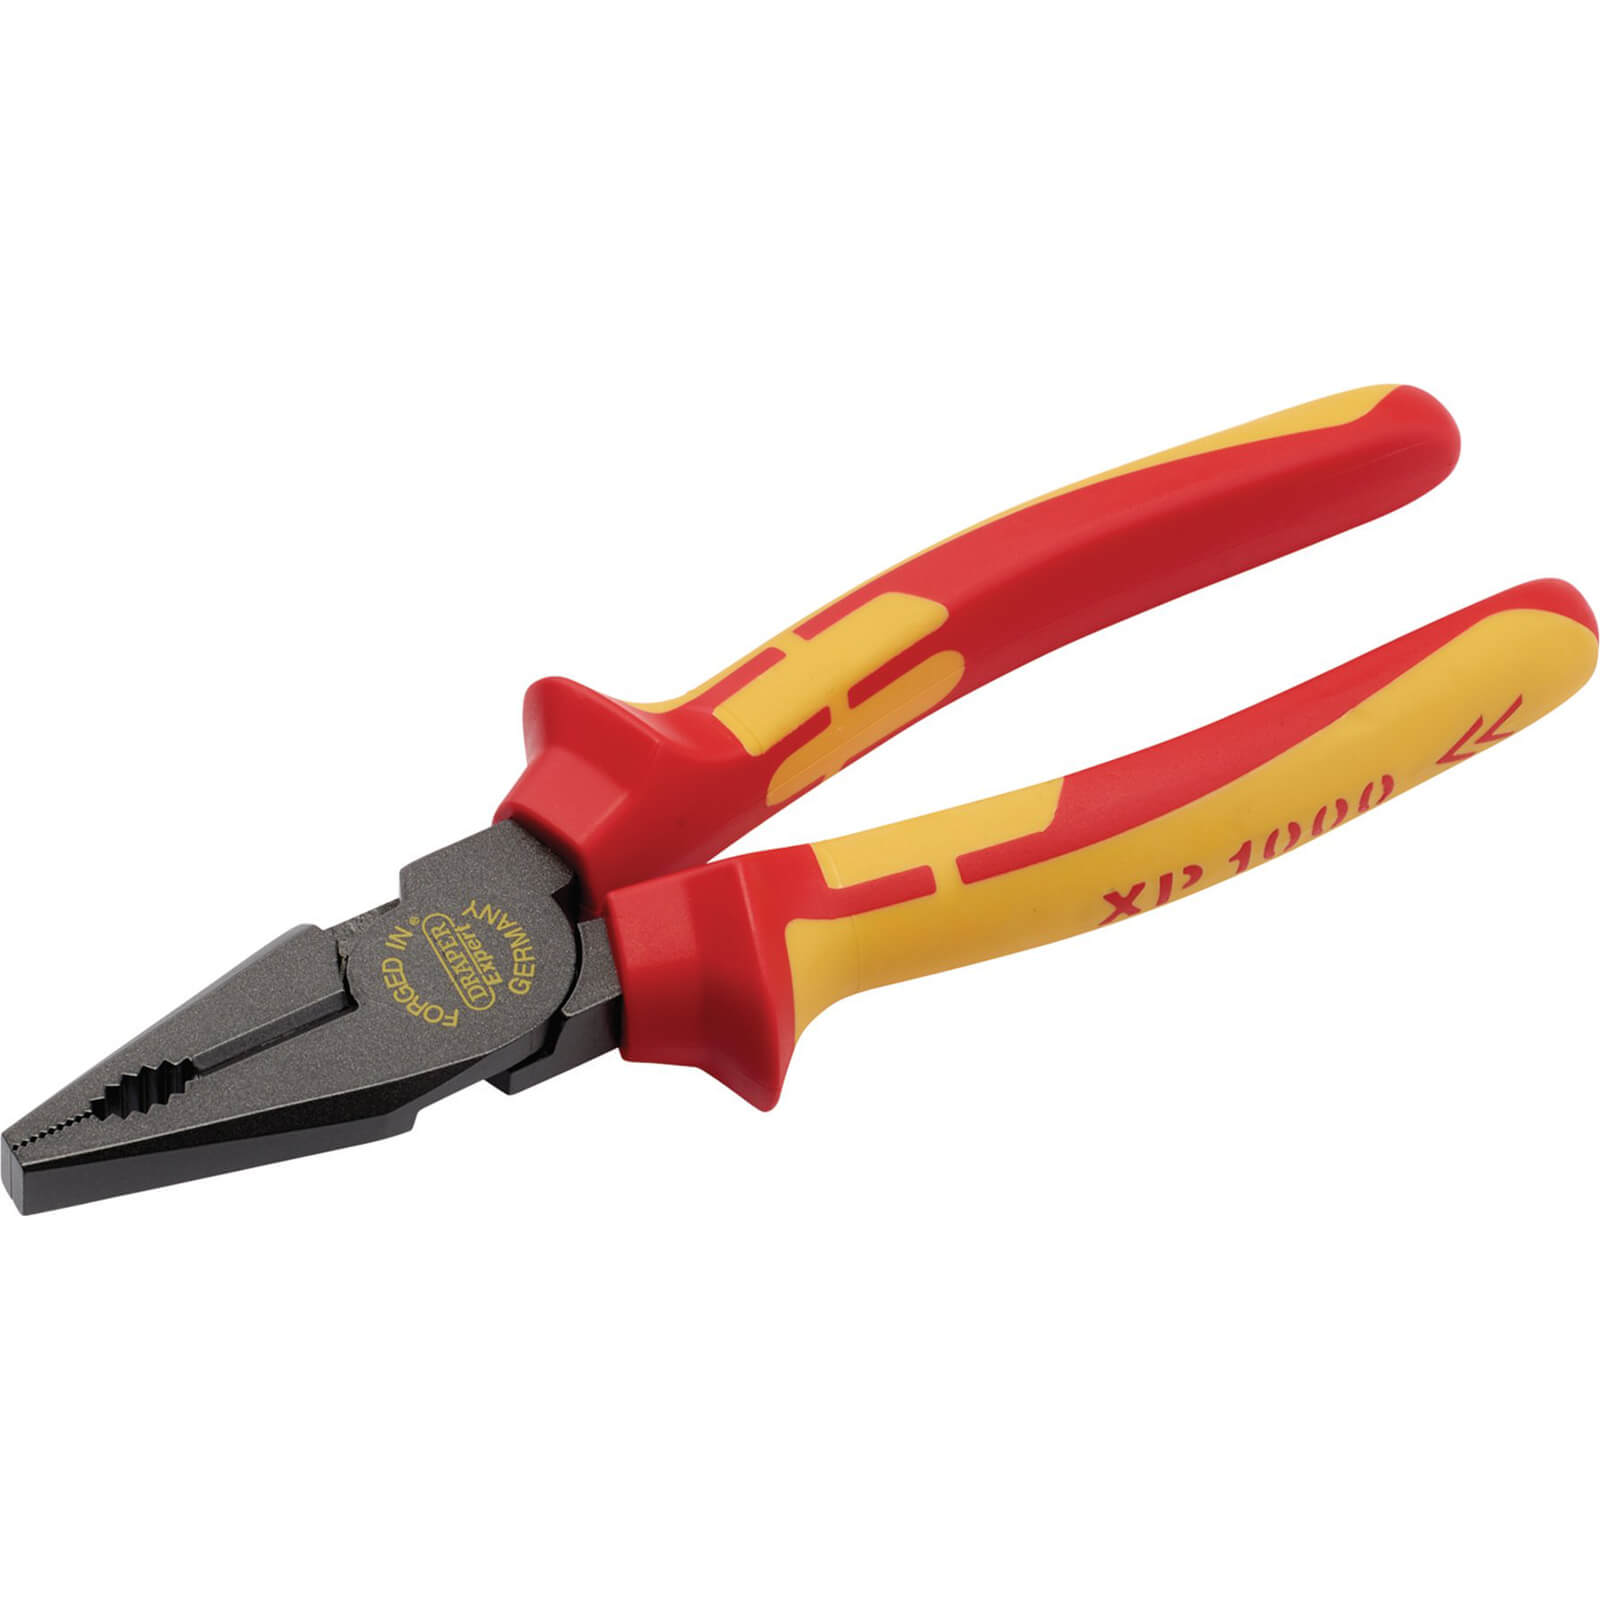 Photo of Draper Xp1000 Vde Insulated High Leverage Combination Pliers 200mm